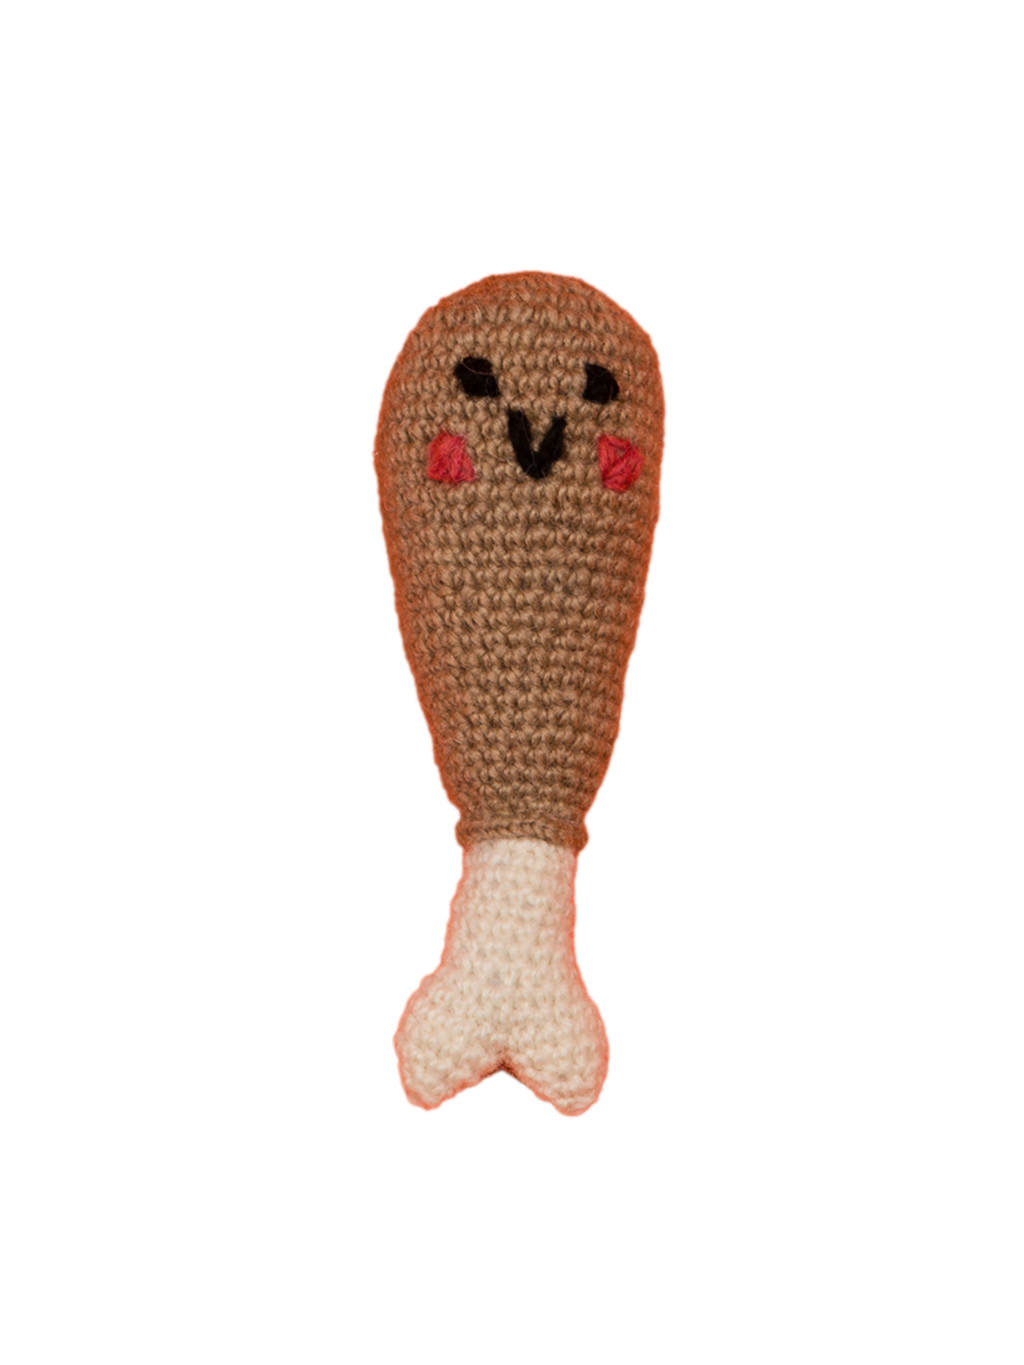 Hand Knit Peanut Butter Dog Toy